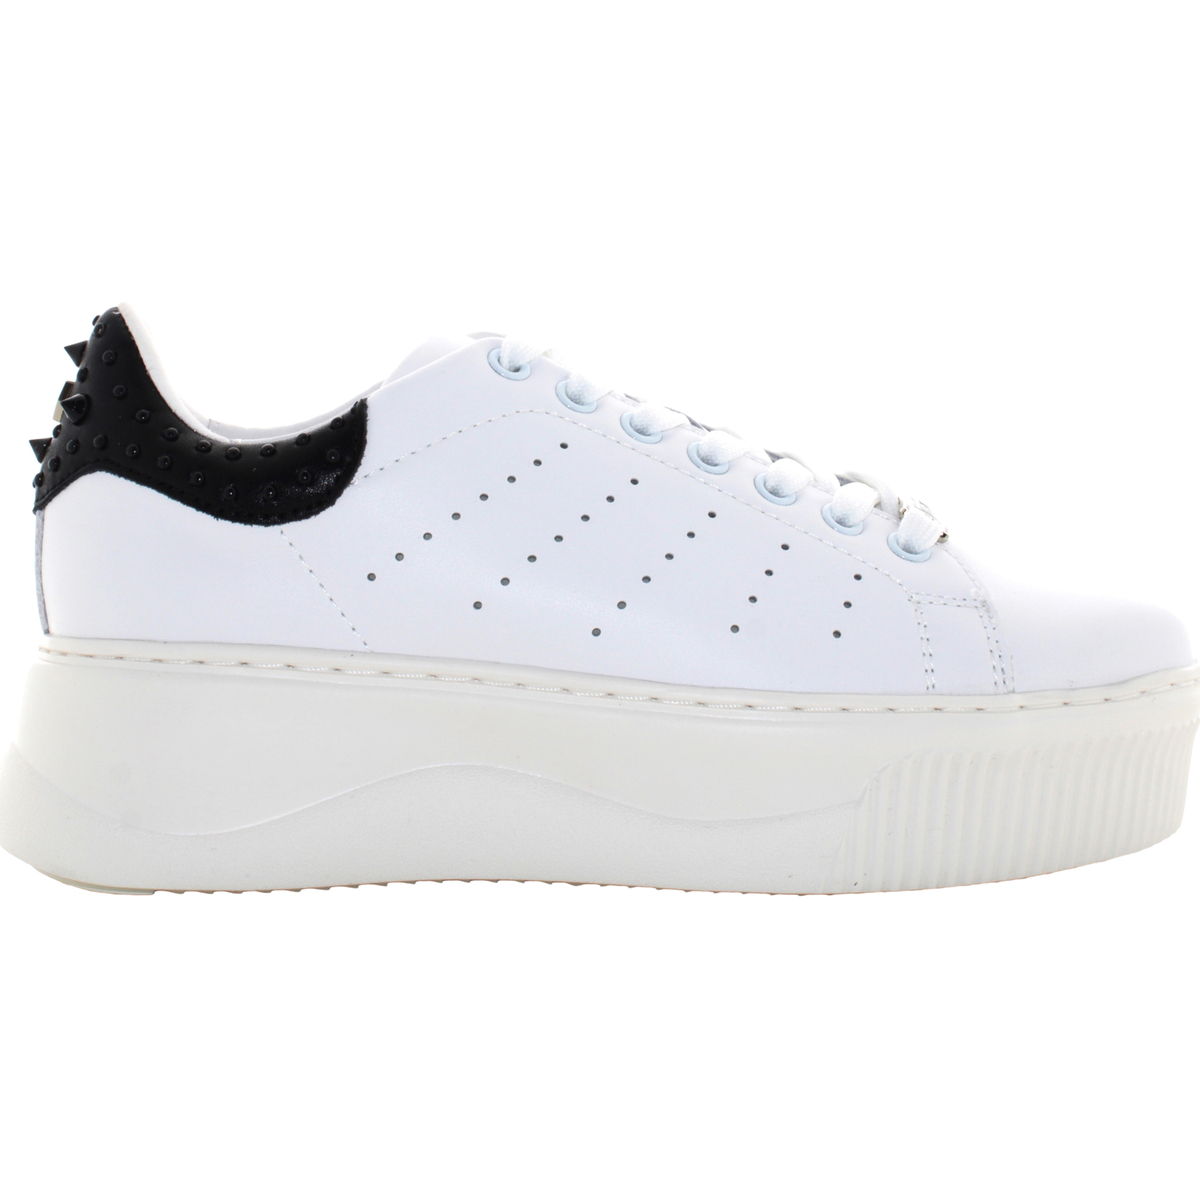 Chaussures Femme Polo Ralph Laure CLW423602 Autres